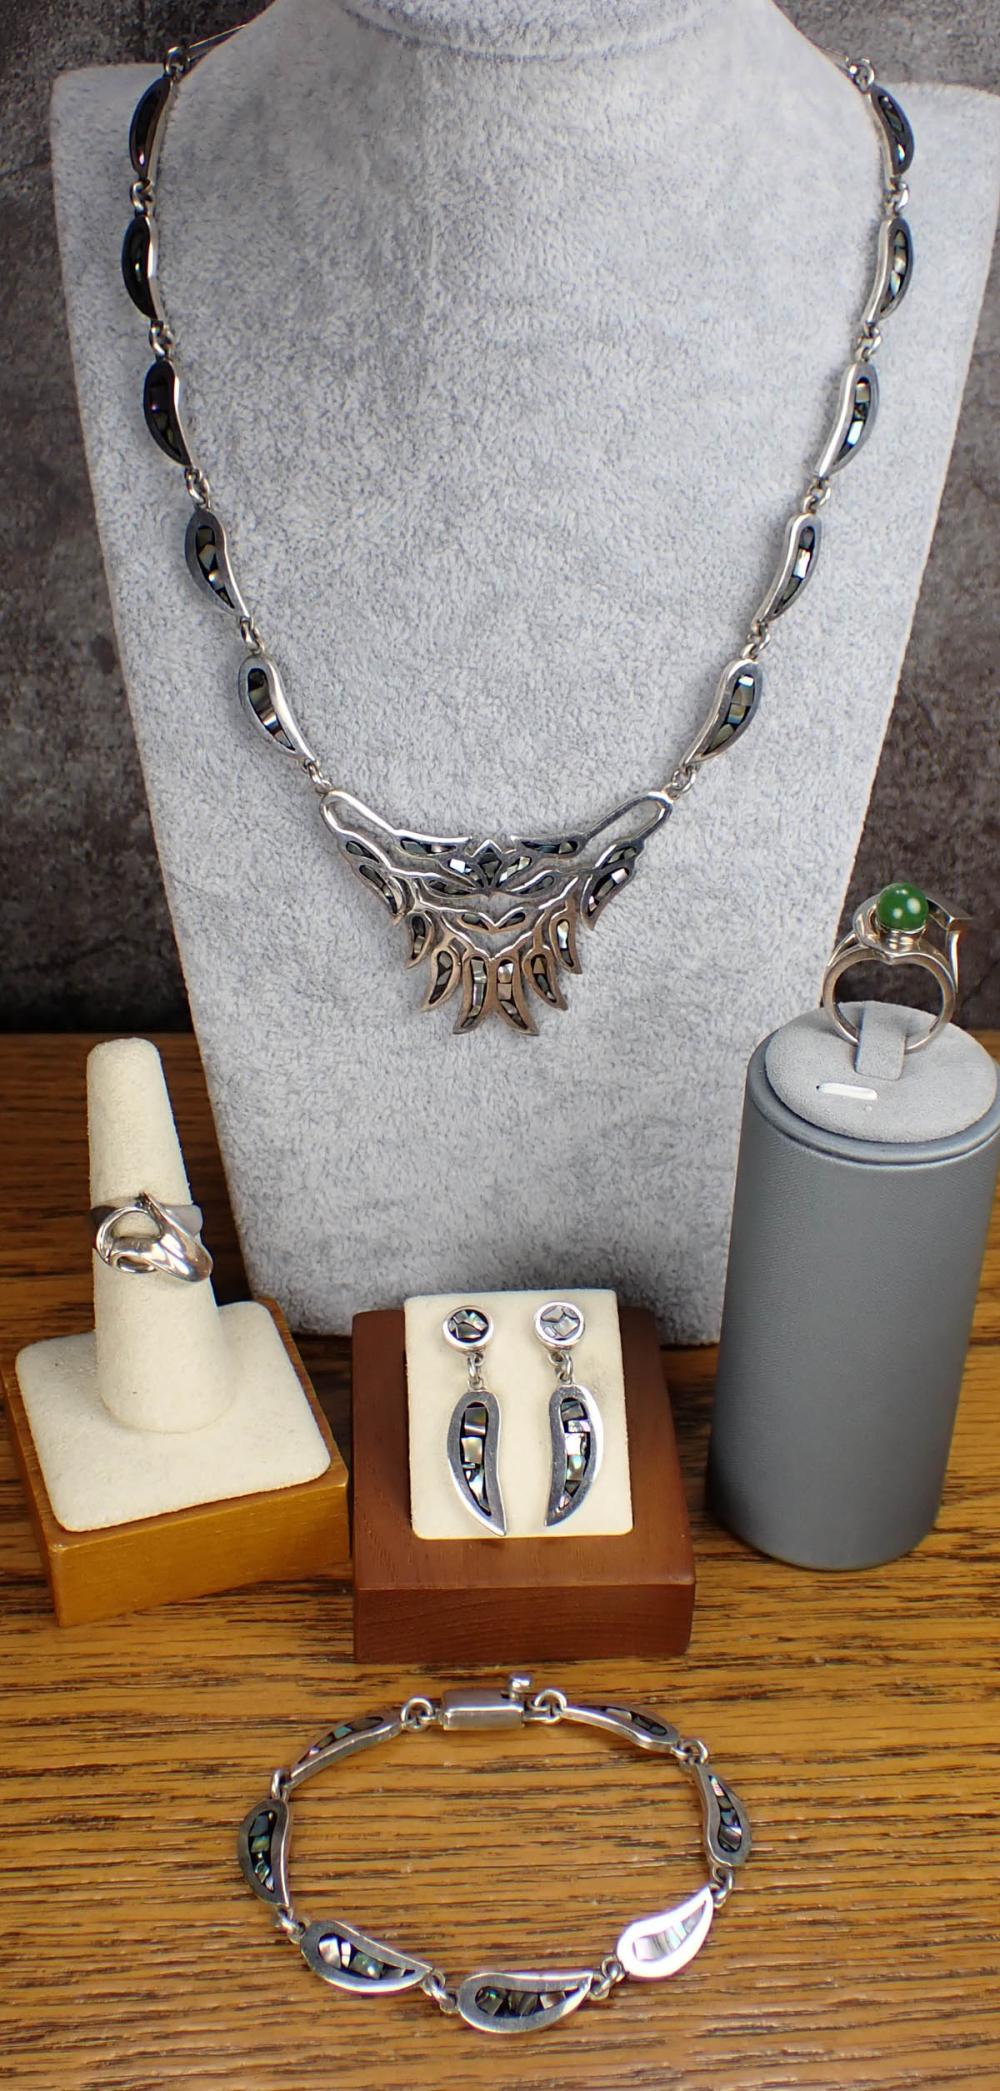 SIX ARTICLES OF STERLING SILVER